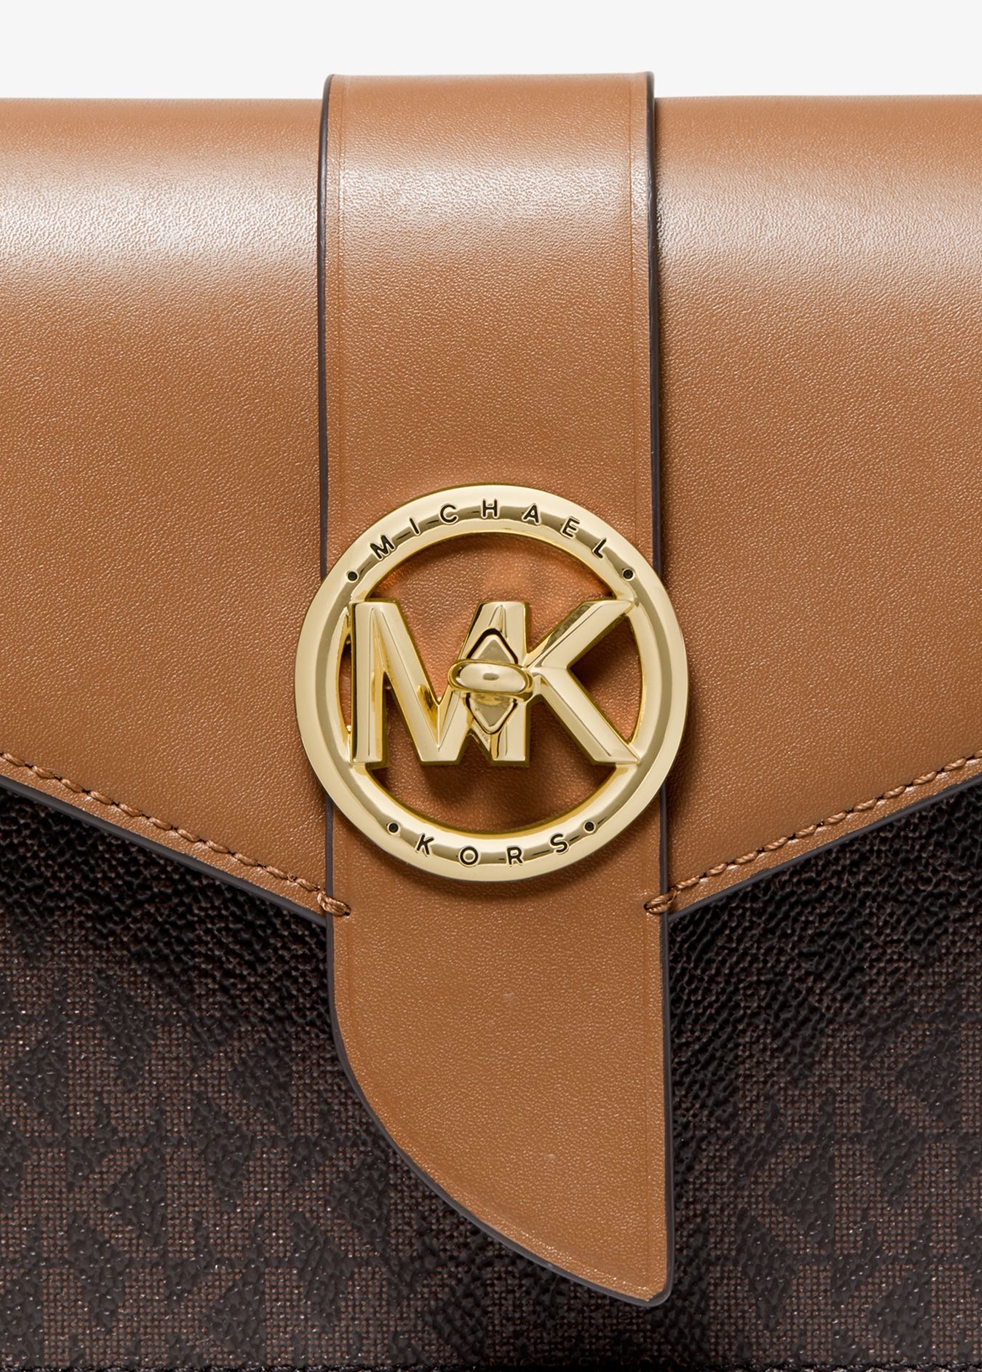 logo and leather convertible crossbody bag